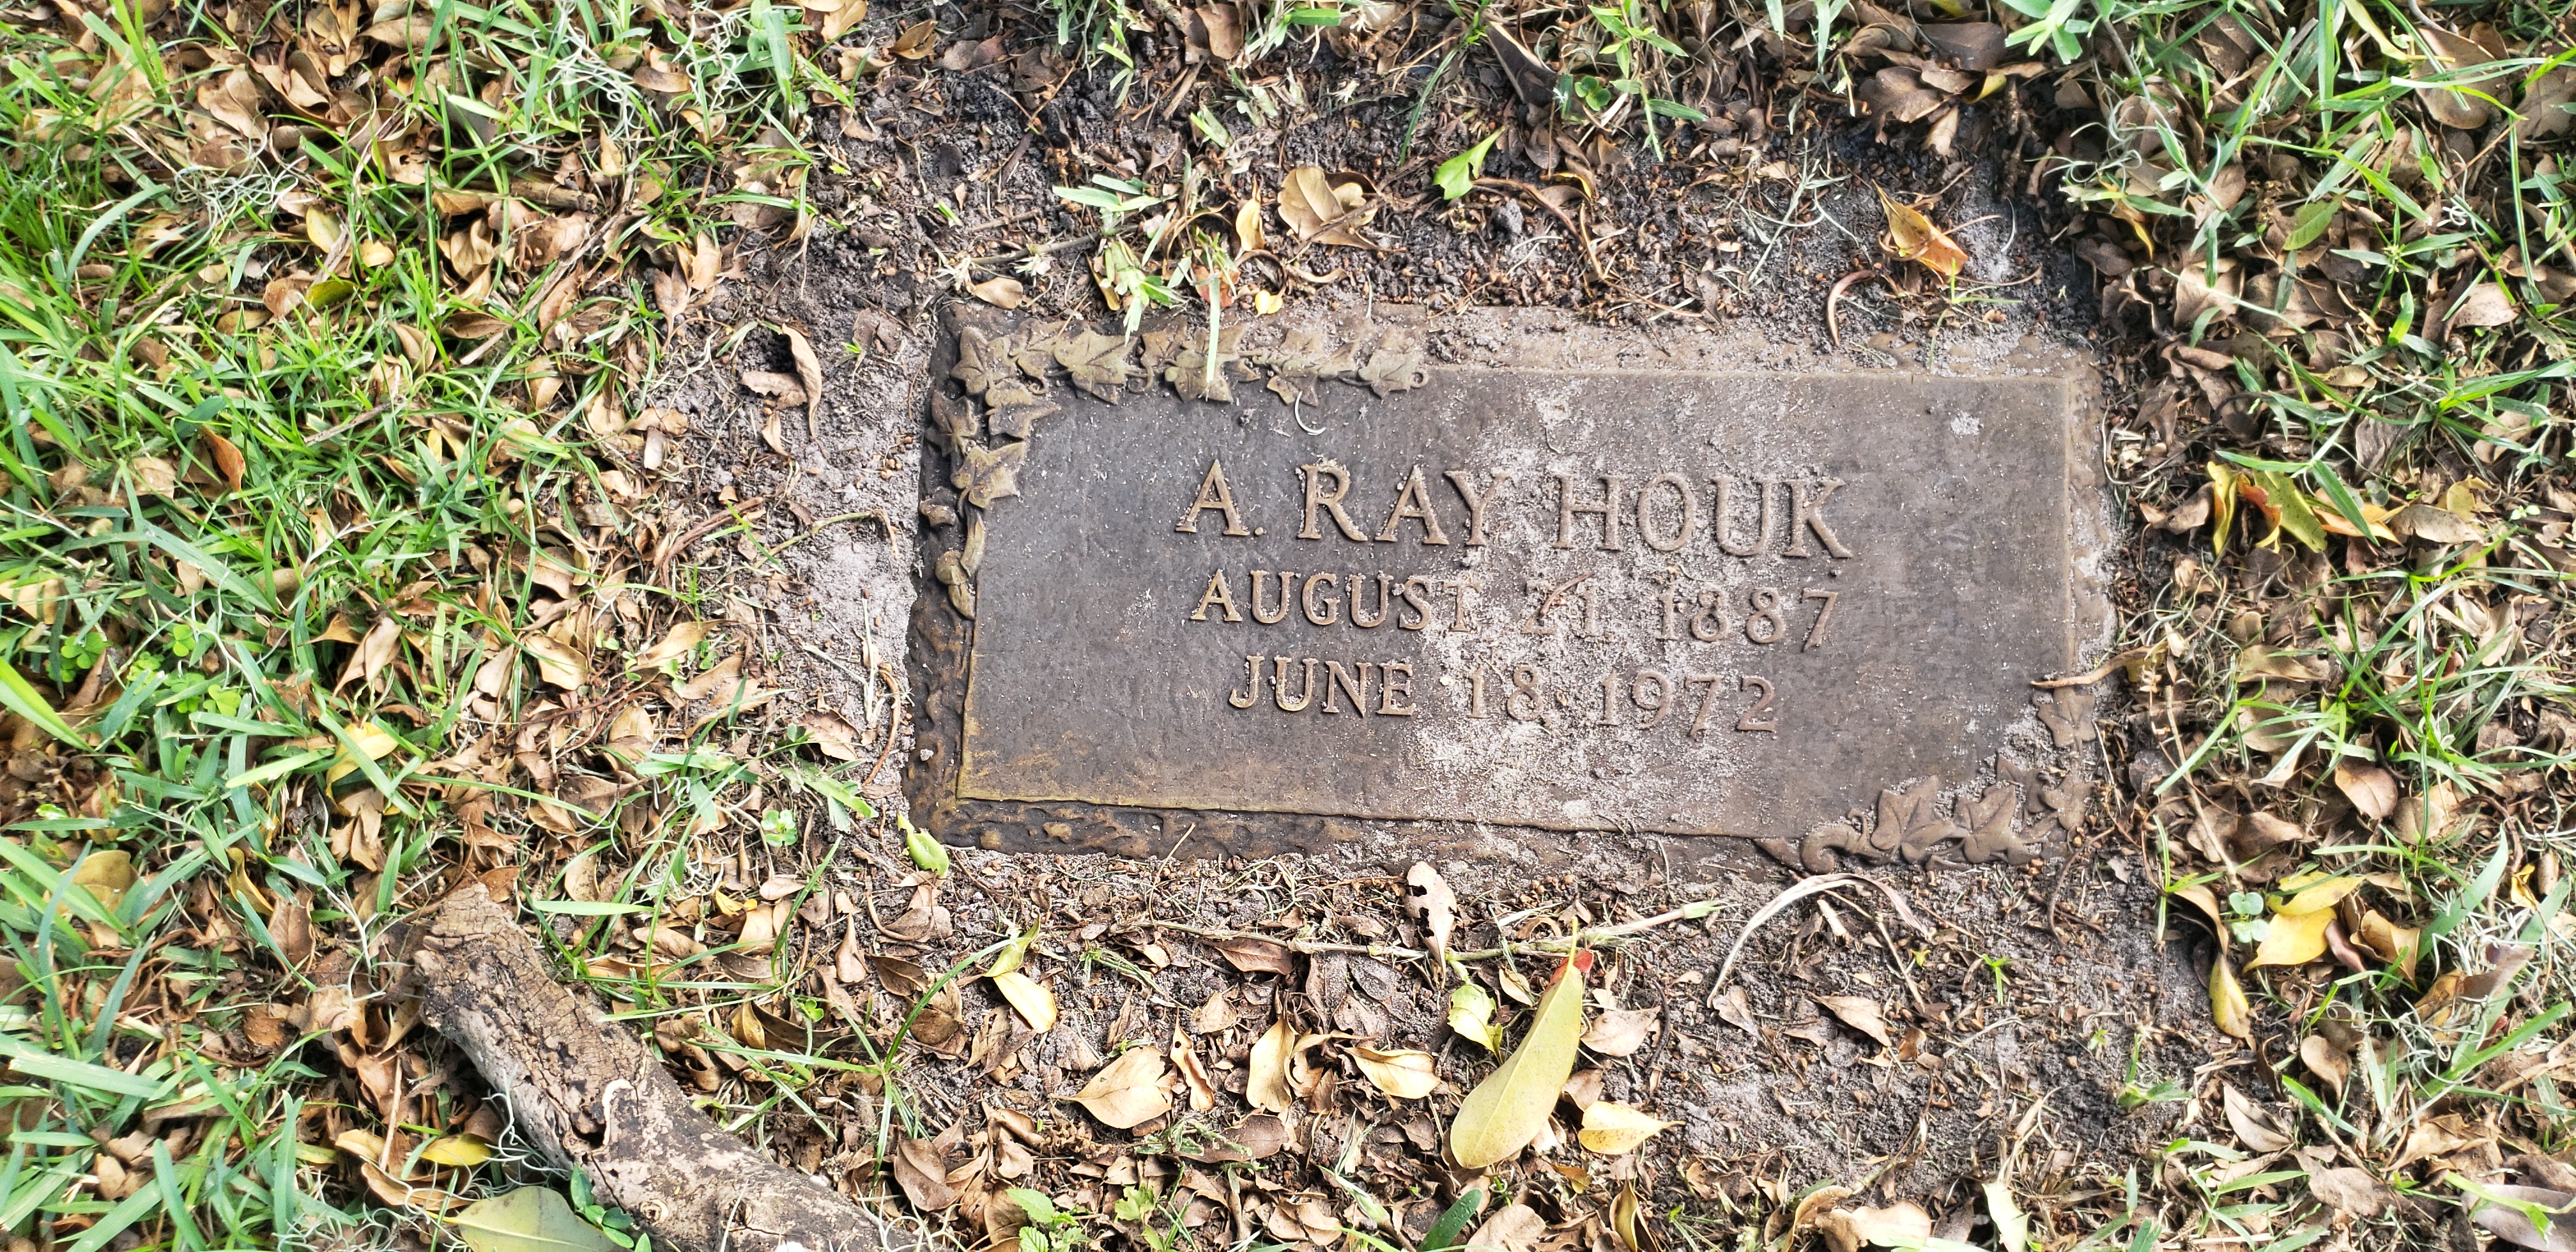 A Ray Houk